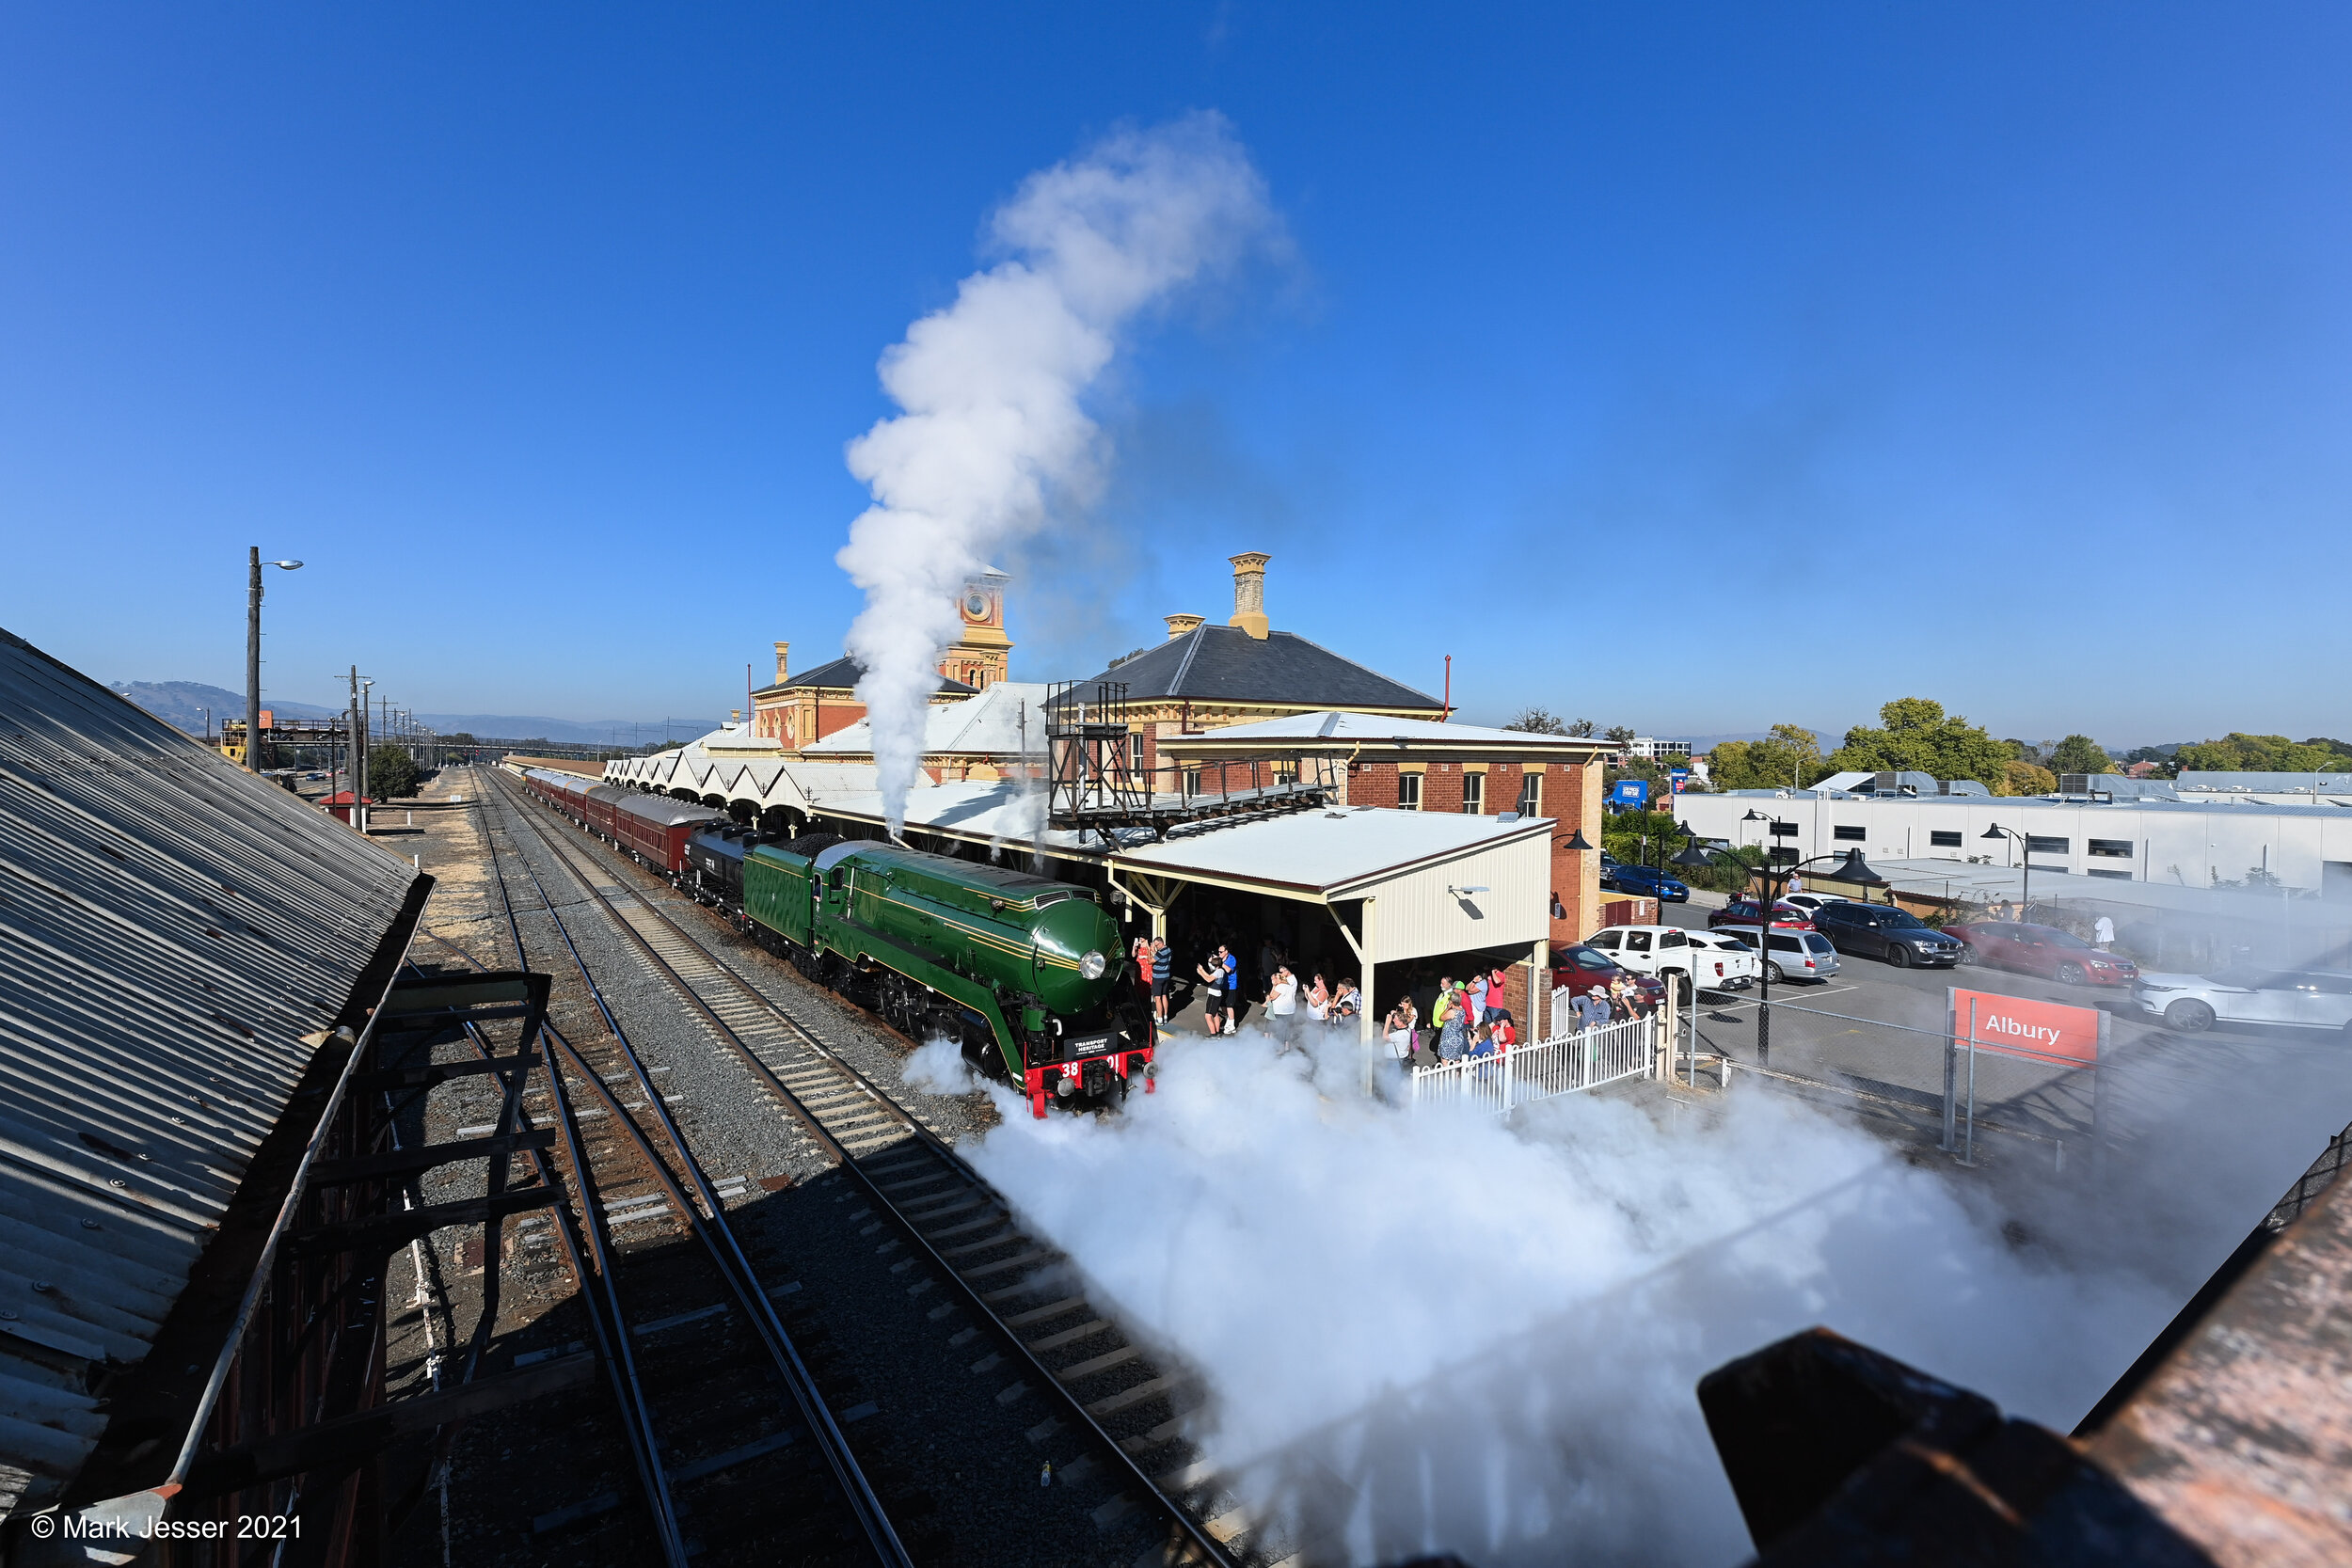  (Photo Mark Jesser) Albury.Tourist steam train 3801 visits Albury for the easter long weekend doing train trips to Gerogery and return. 